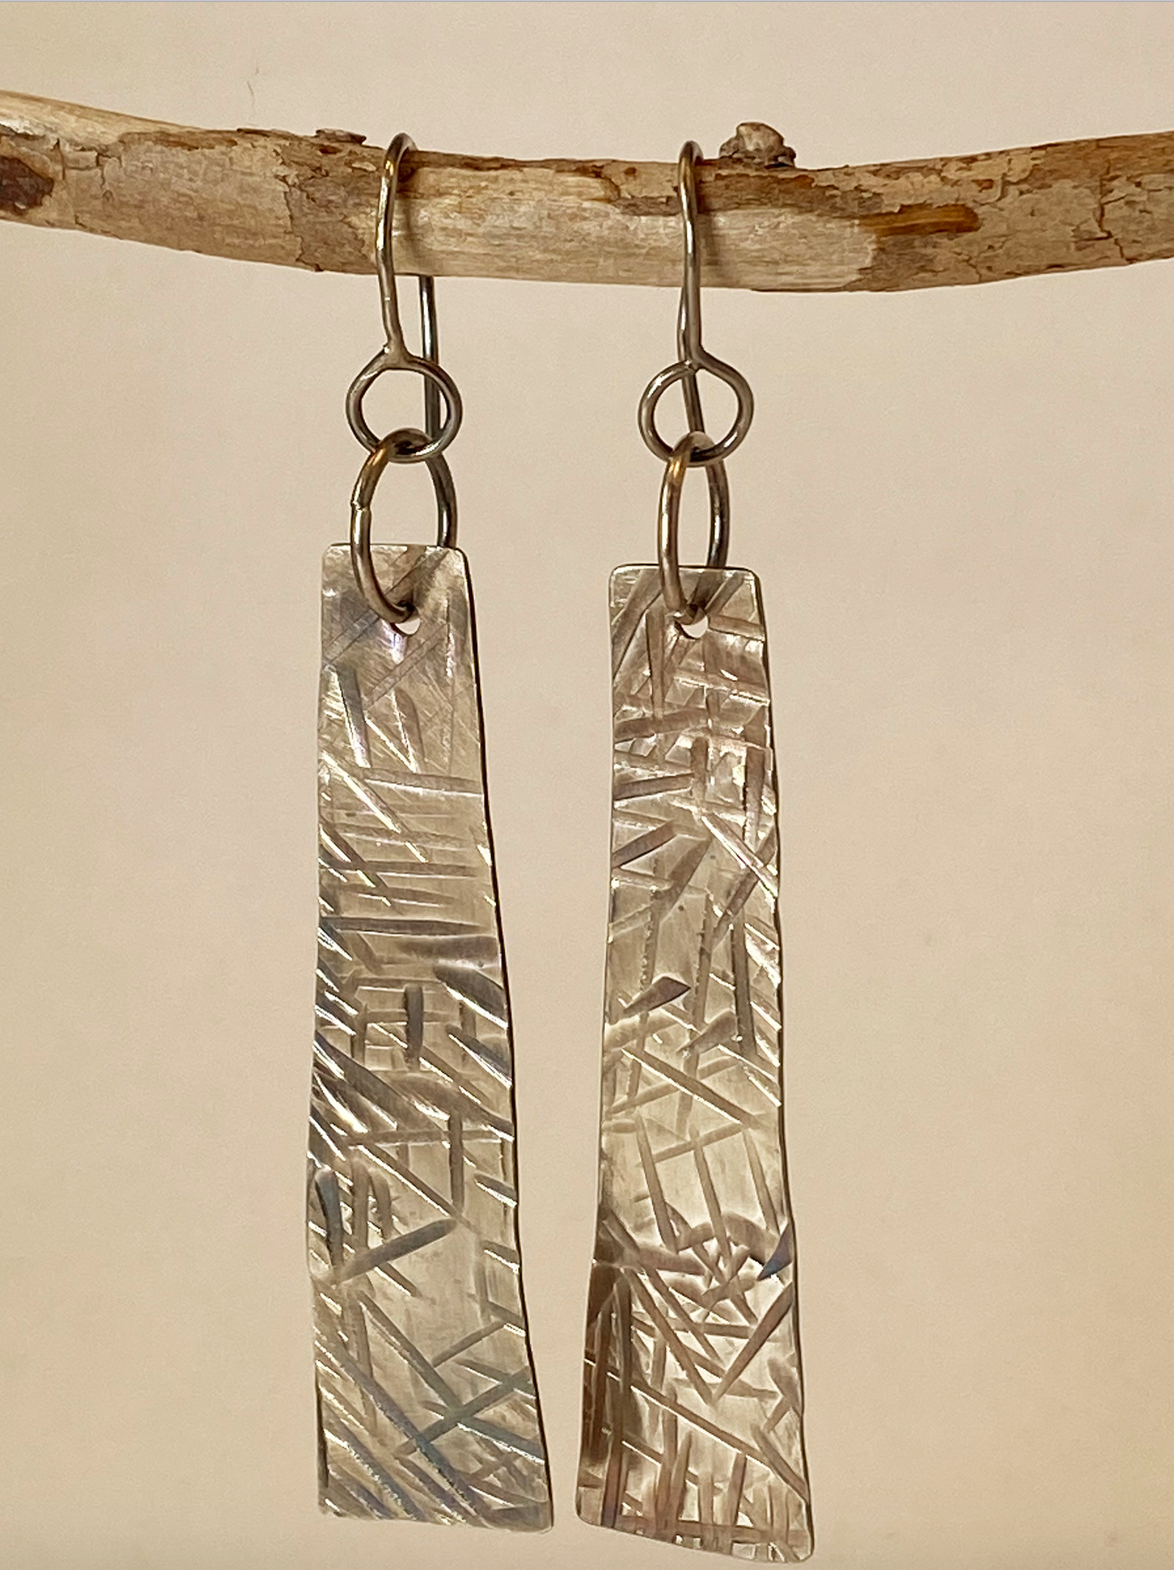 One-of-a-kind hand-crafted earrings.  Evocative long sterling silver tablet-shaped earrings. Hand-stamped embellishments. A flattering shape for almost any face. Stellae are 2" long x 1/2" wide. Handmade ear hook and ring add length.  Style: rustic, boho, elemental, earthy yet elegant